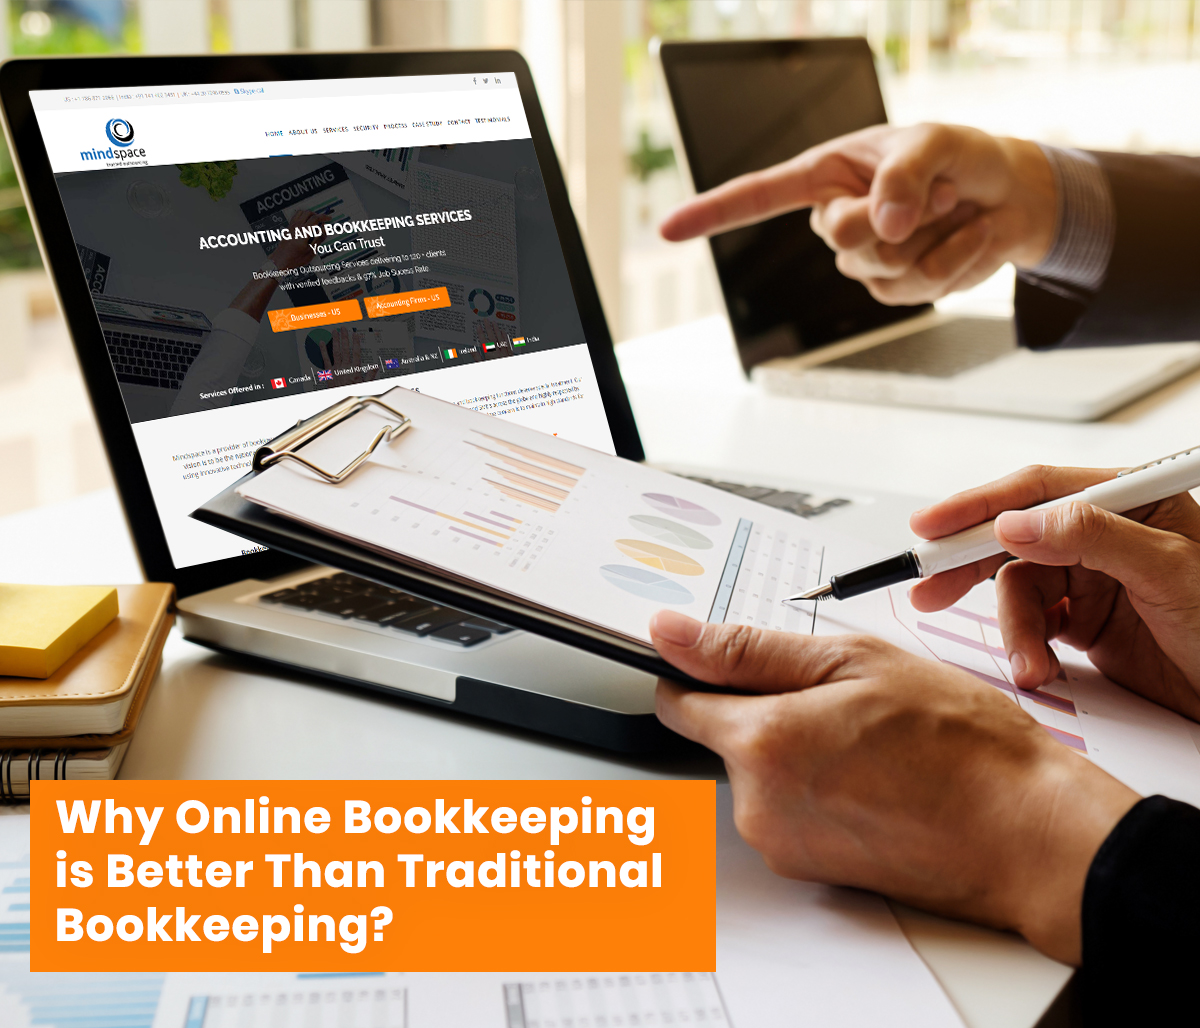 Online Bookkeeping Services Vs Traditional Bookkeeping